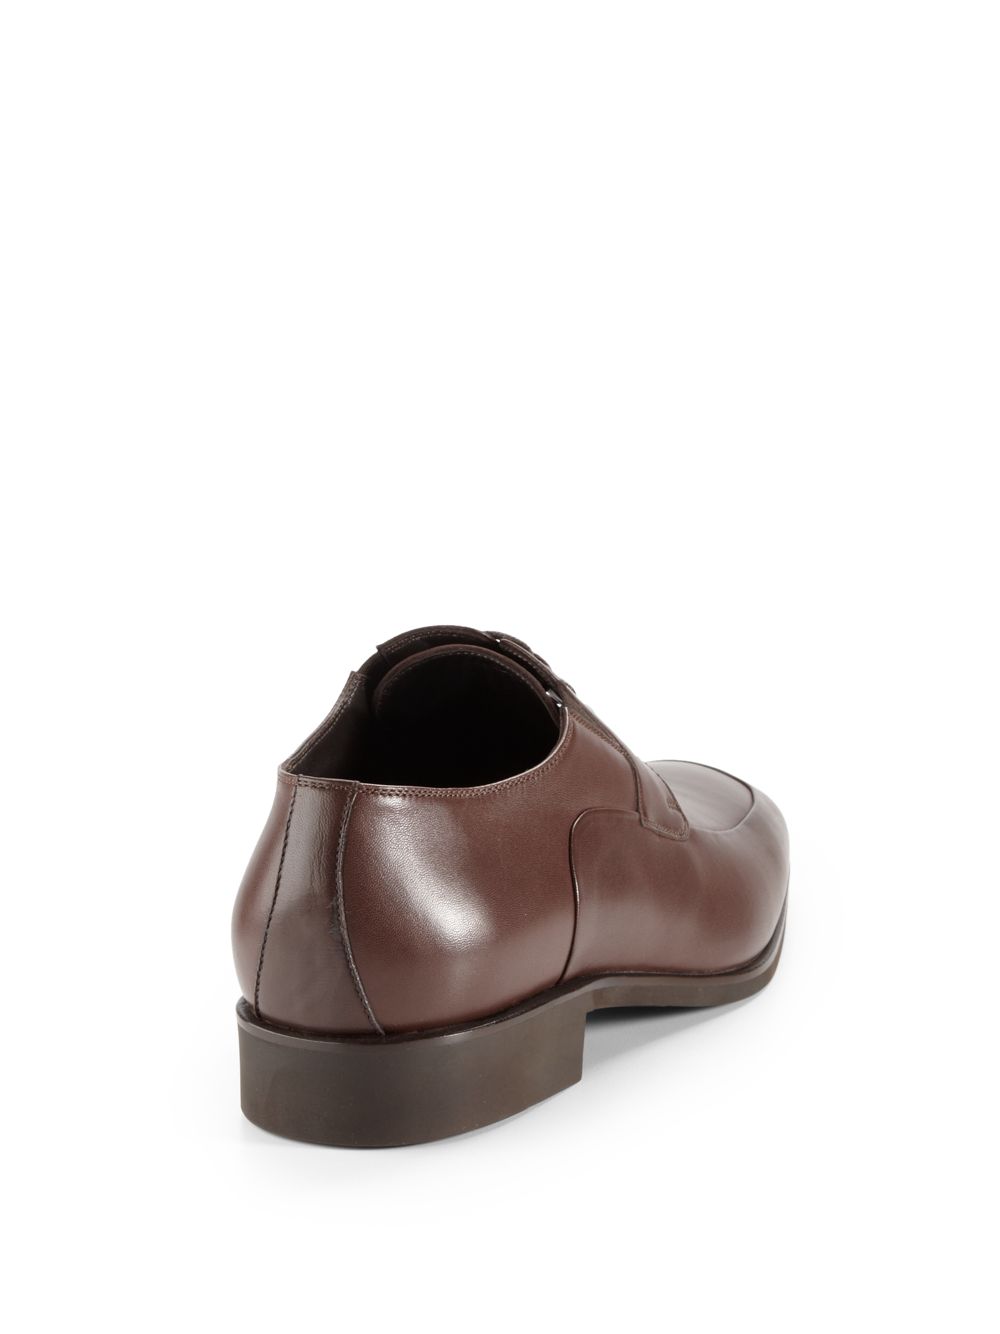 Lyst - Bruno magli Rammola Leather Dress Shoes in Brown for Men